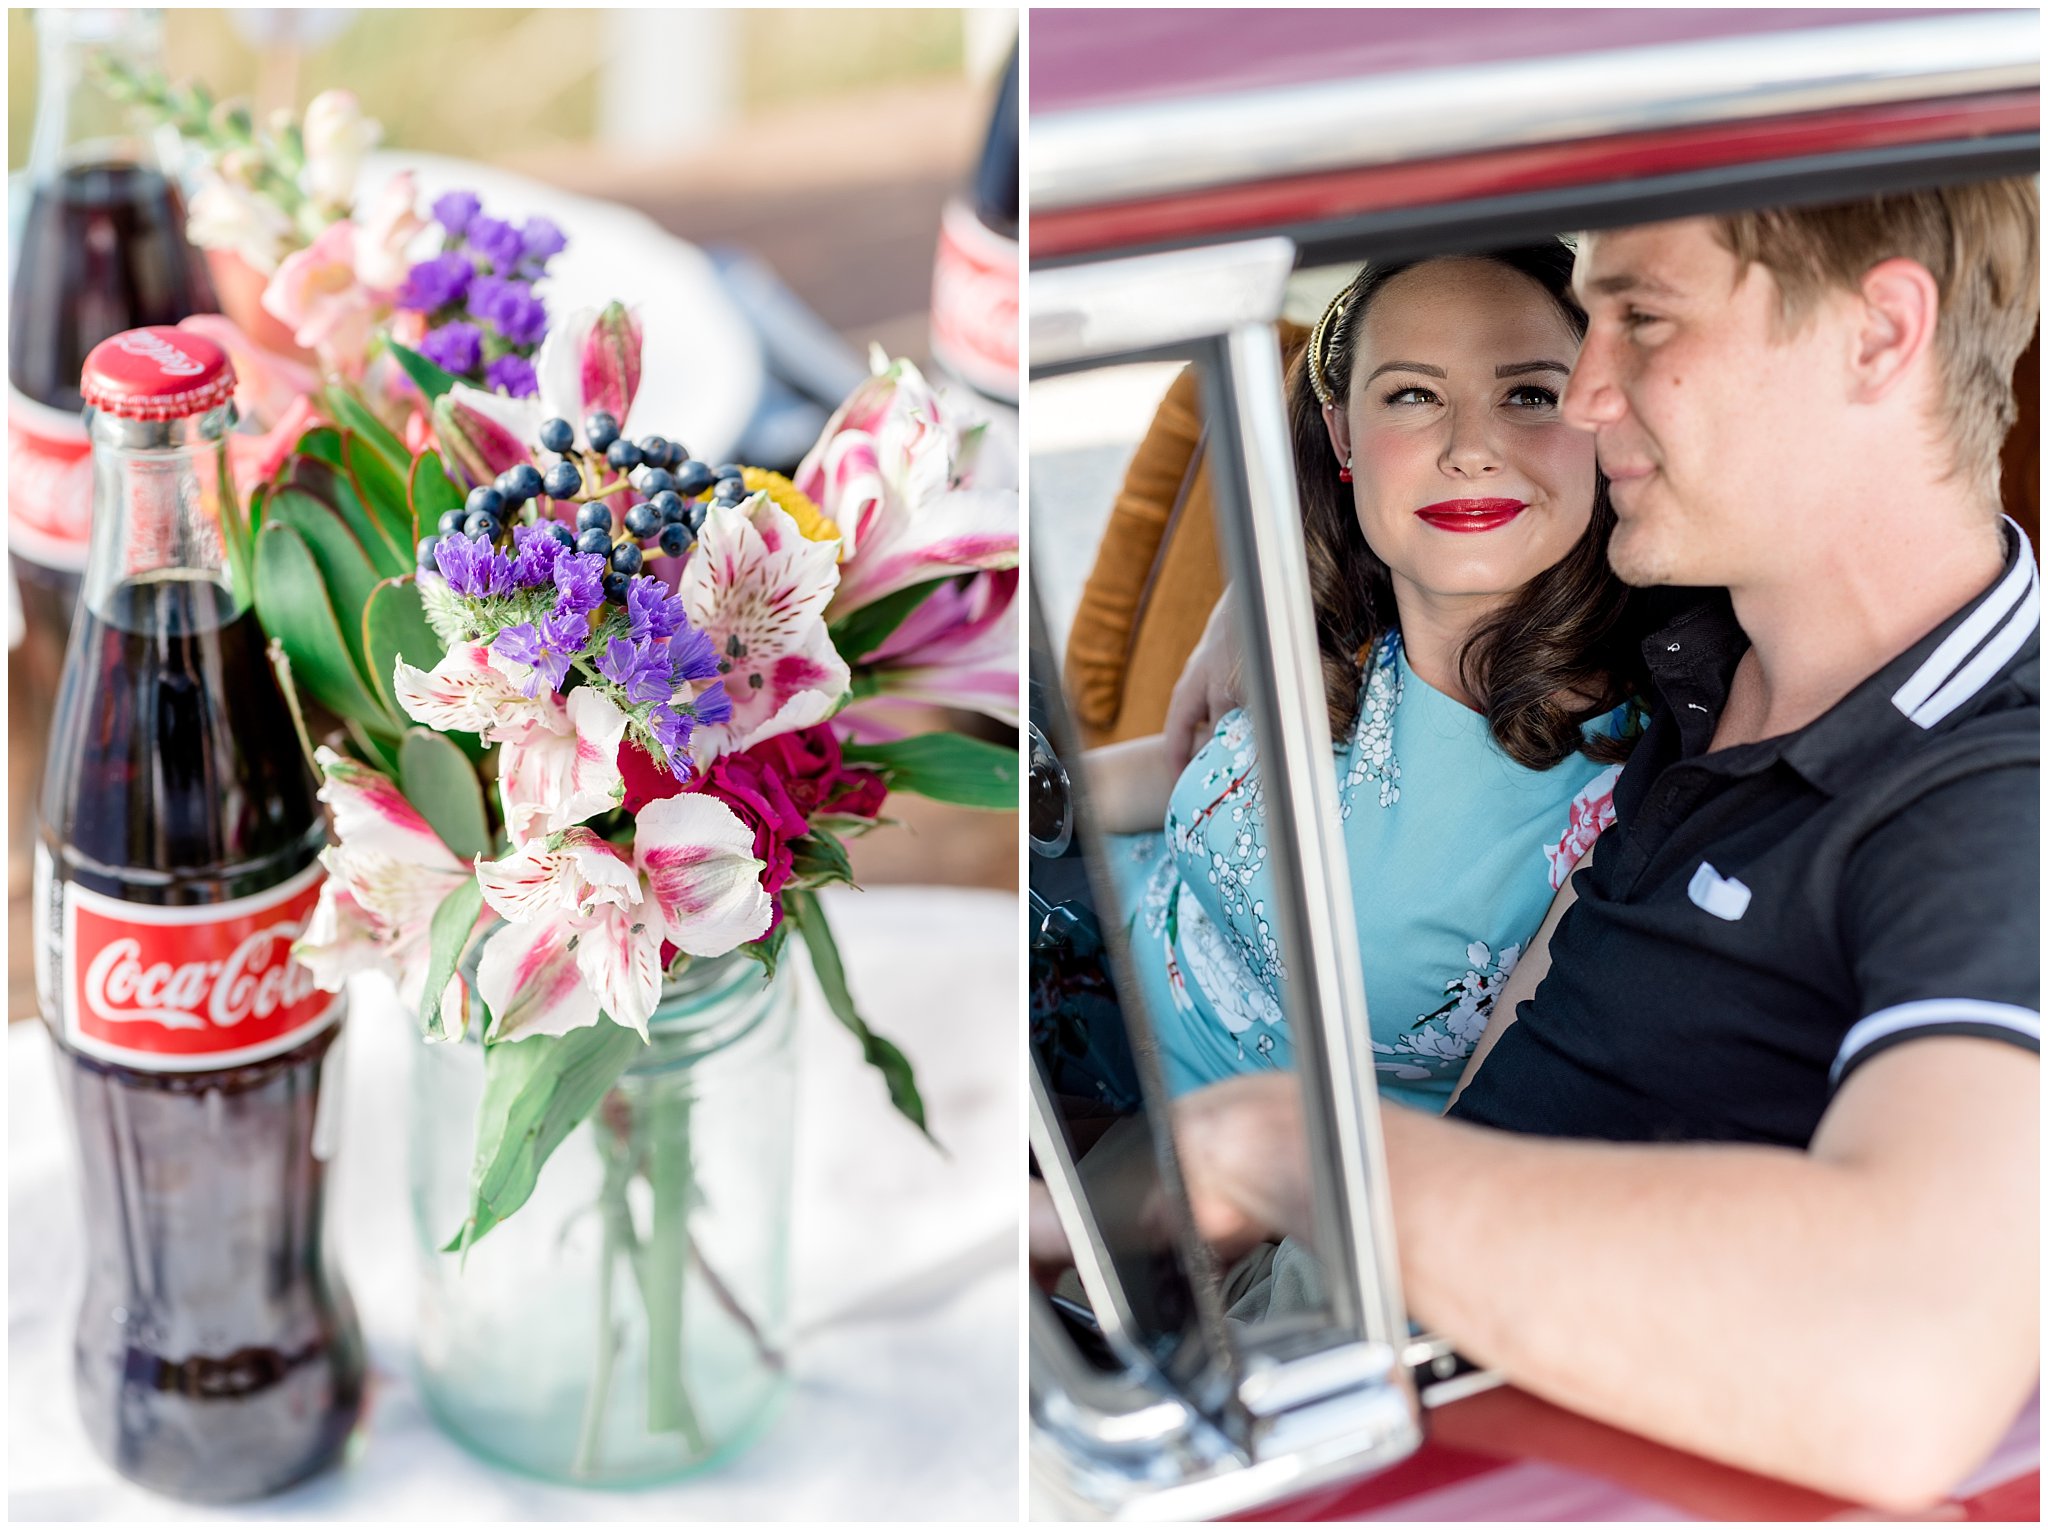 Couple in 1950's classic car and table setting flowers and Coke bottle detail shot in Utah | Jessie and Dallin Photography | Utah Wedding Photographers